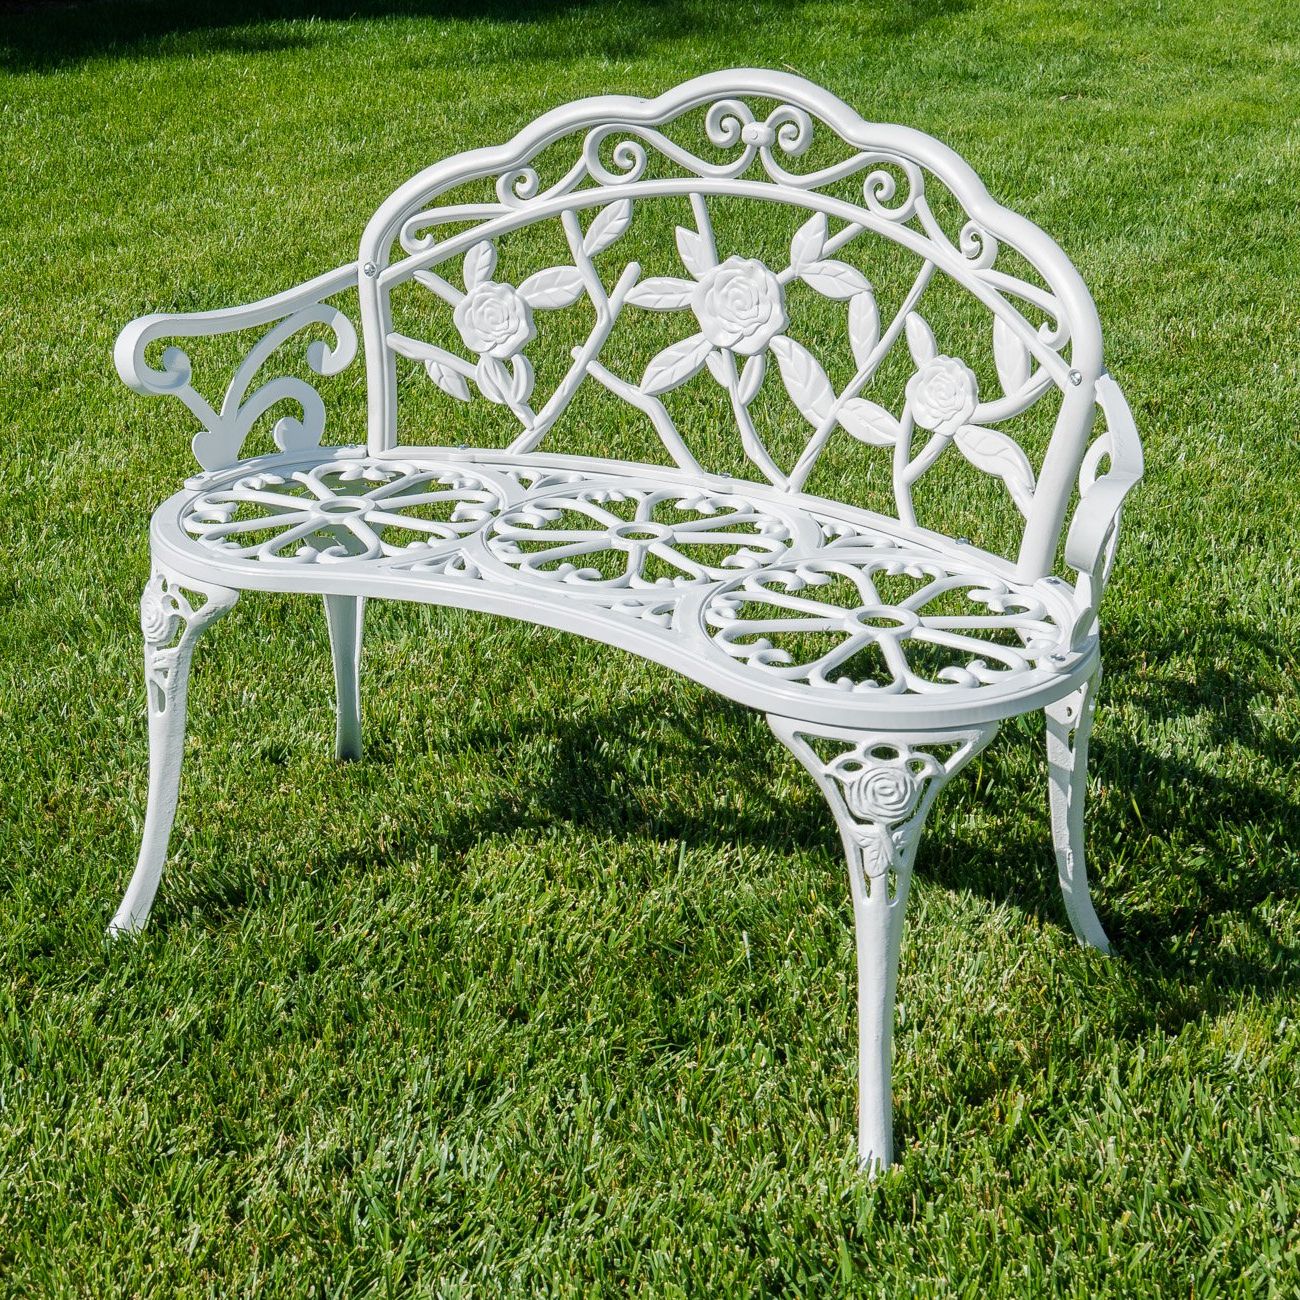 [%11 Best Garden Benches Of 2021 [reviews+buyer's Guide] For Most Recent Guyapi Garden Benches|guyapi Garden Benches For Most Up To Date 11 Best Garden Benches Of 2021 [reviews+buyer's Guide]|trendy Guyapi Garden Benches Throughout 11 Best Garden Benches Of 2021 [reviews+buyer's Guide]|well Liked 11 Best Garden Benches Of 2021 [reviews+buyer's Guide] With Regard To Guyapi Garden Benches%] (View 28 of 30)